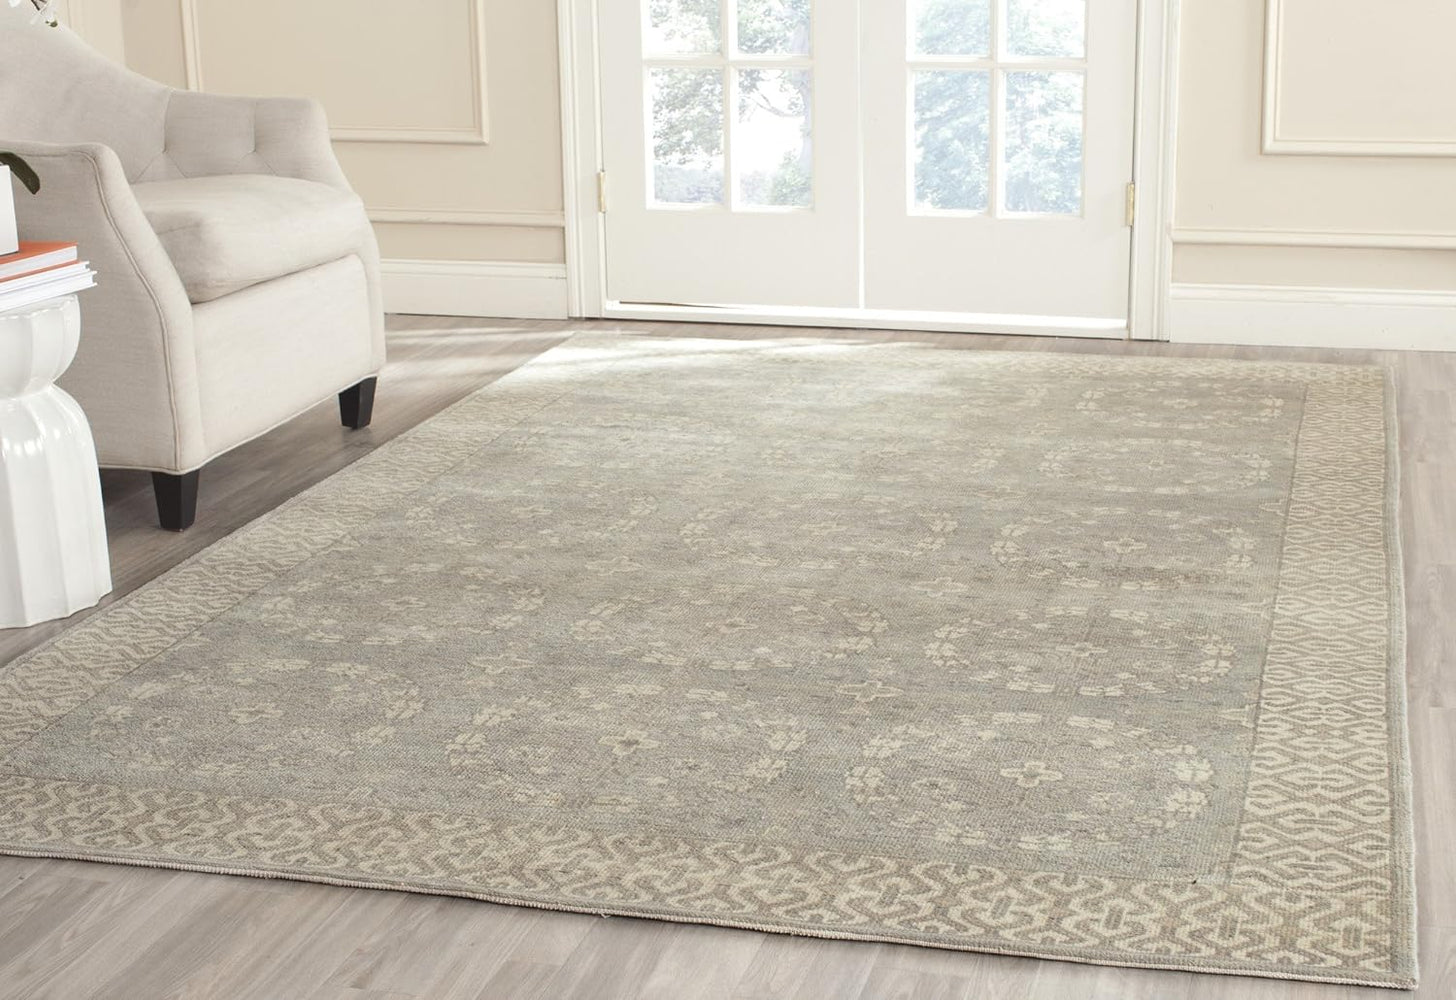 SAFAVIEH Oushak Collection Area Rug - 6' x 9', Blue & Ivory, Hand-Knotted Traditional Oriental Wool, Ideal for High Traffic Areas in Living Room, Bedroom